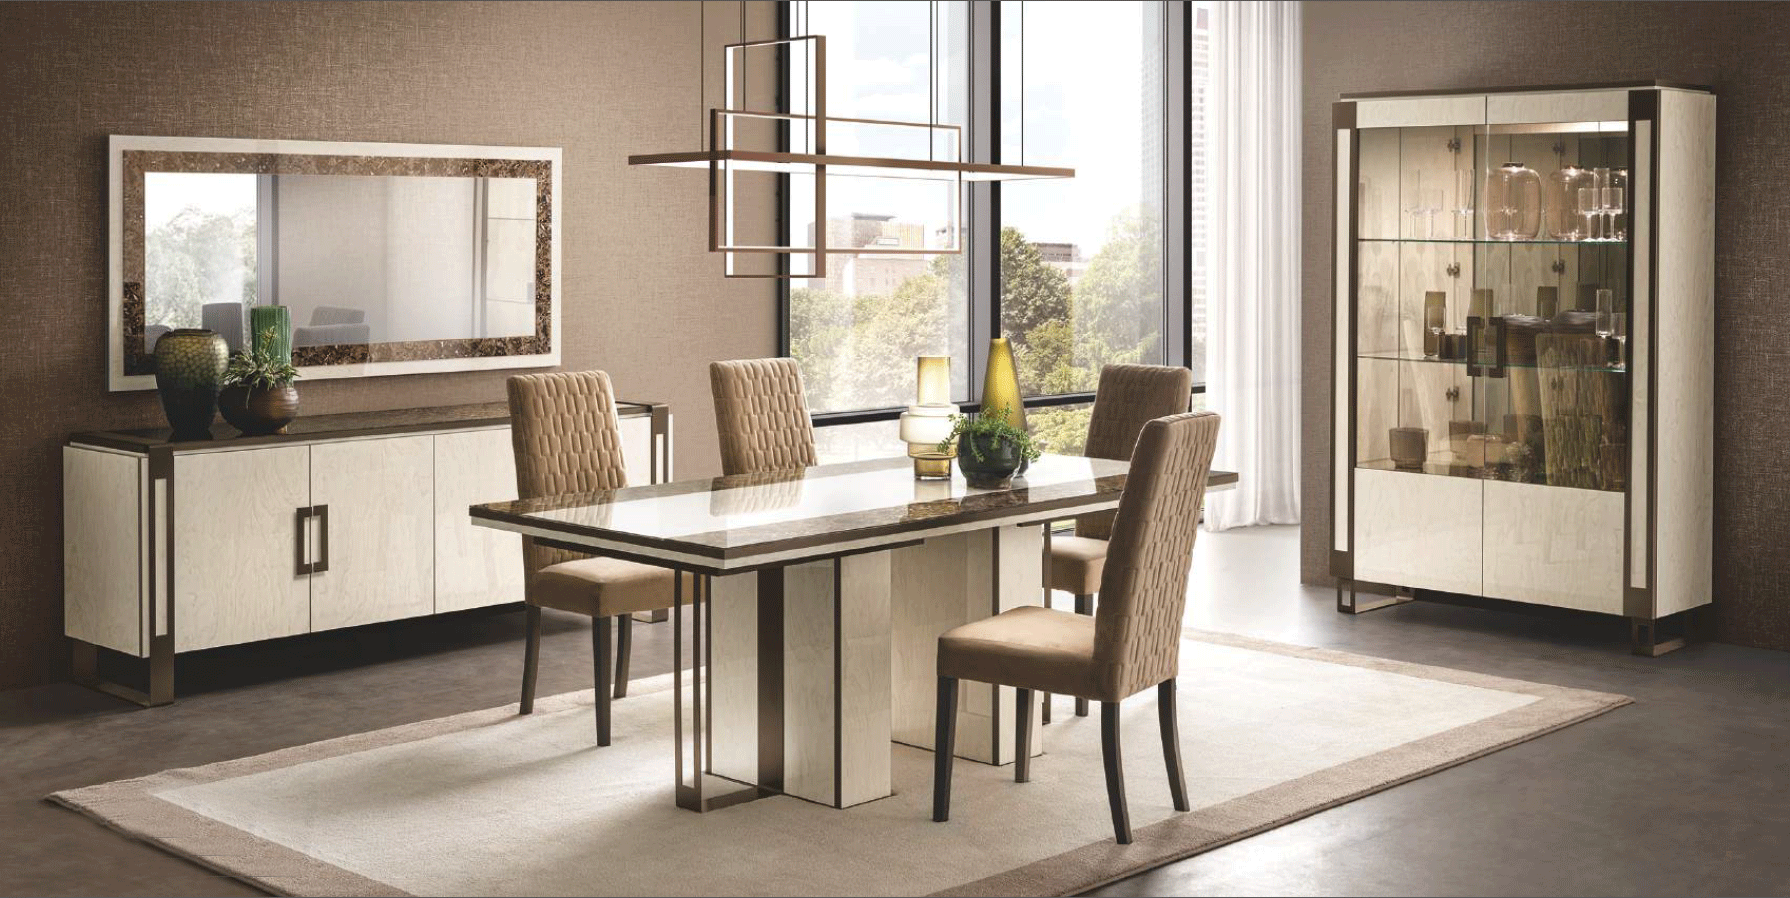 Brands Fama Modern Living Room, Spain Poesia Dining room Additional items